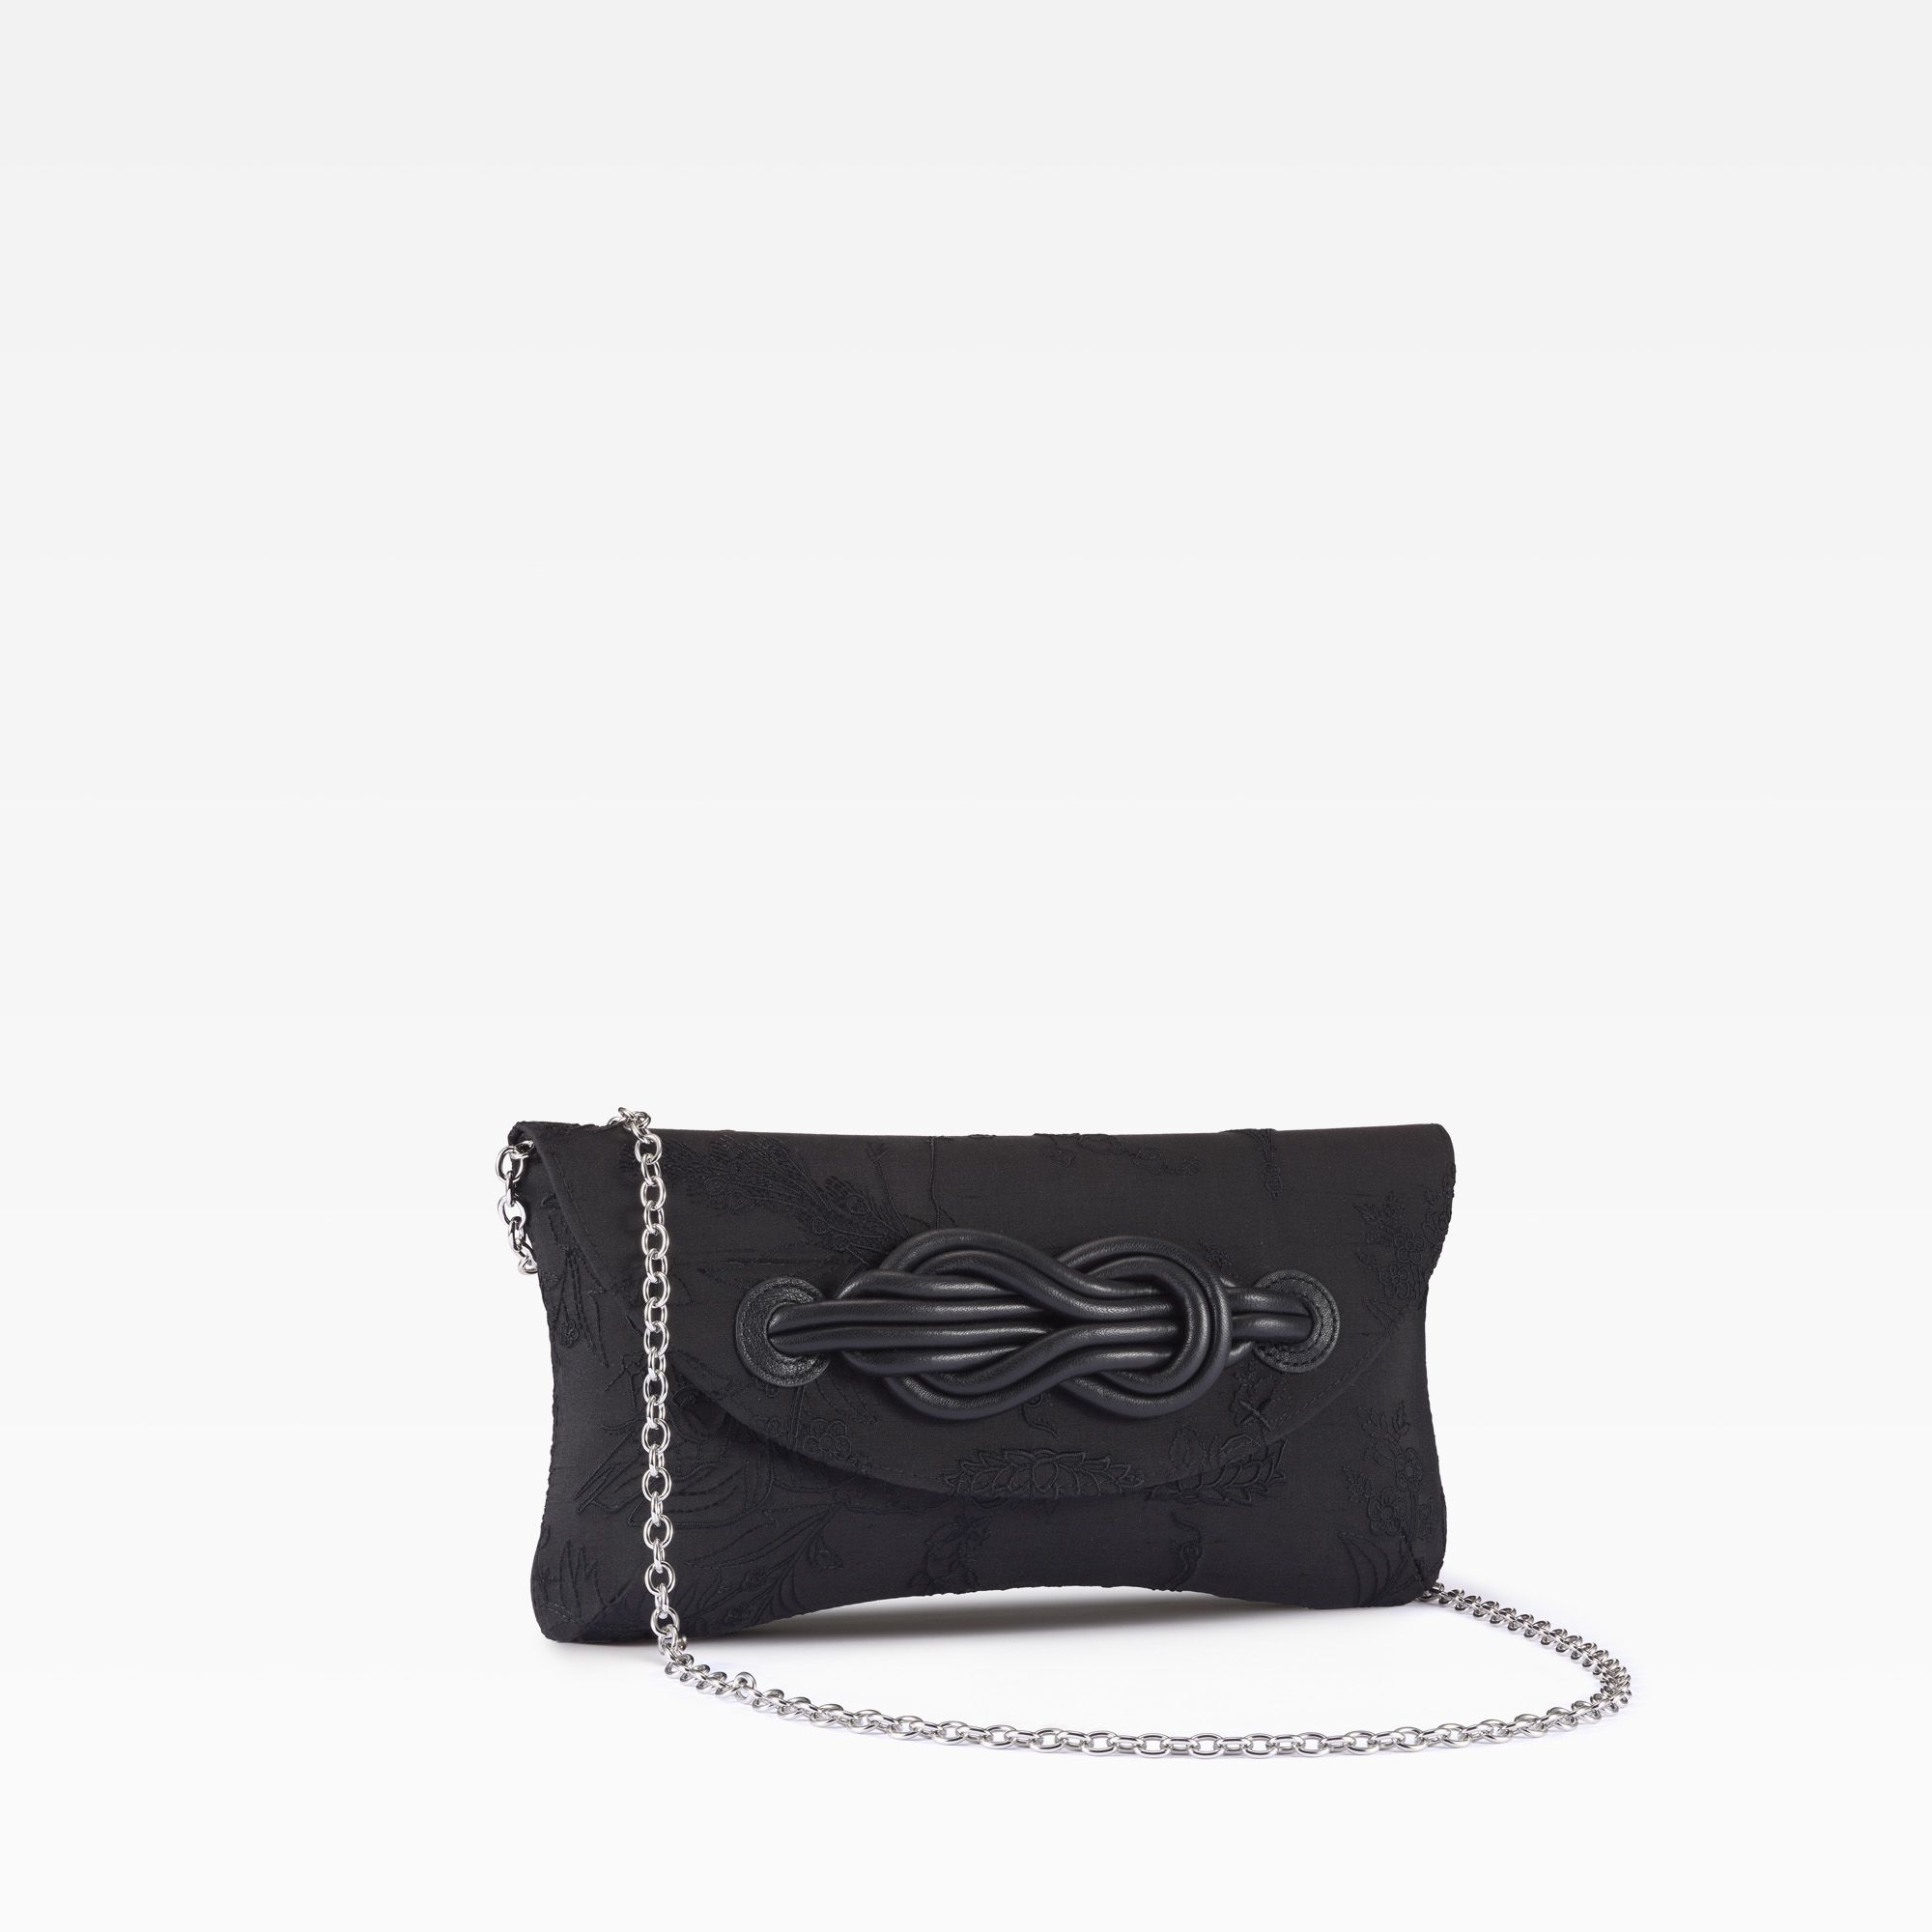 Chinese Endless Knot Clutch | Shanghai Tang